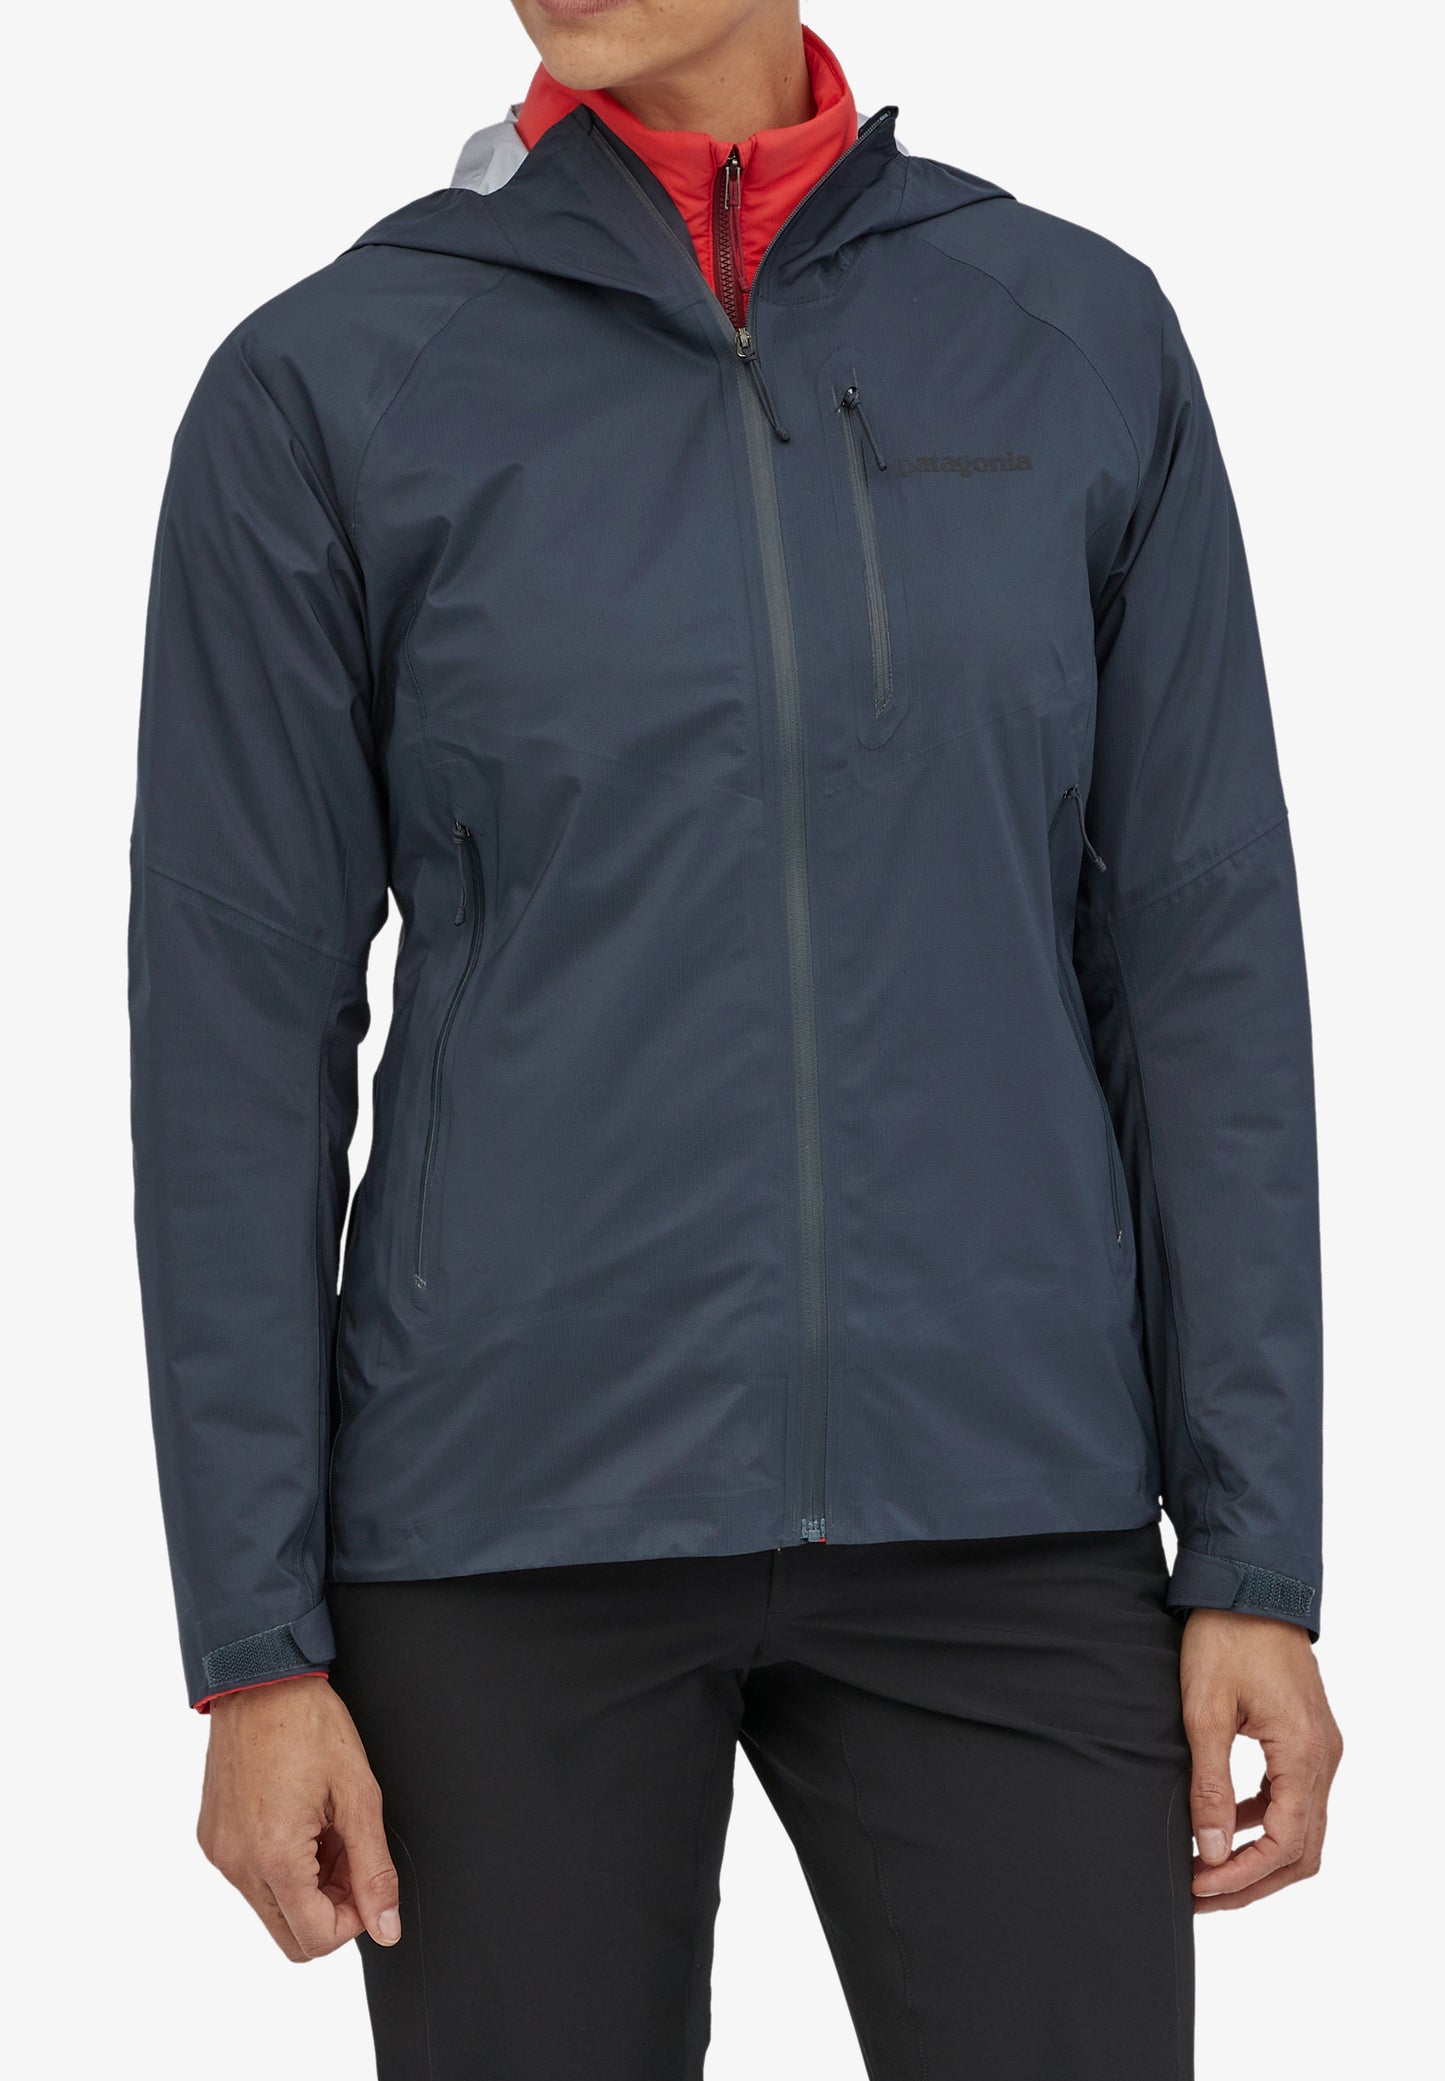 PATAGONIA | CHAQUETA ULTRALIGERA IMPERMEABLE MUJER